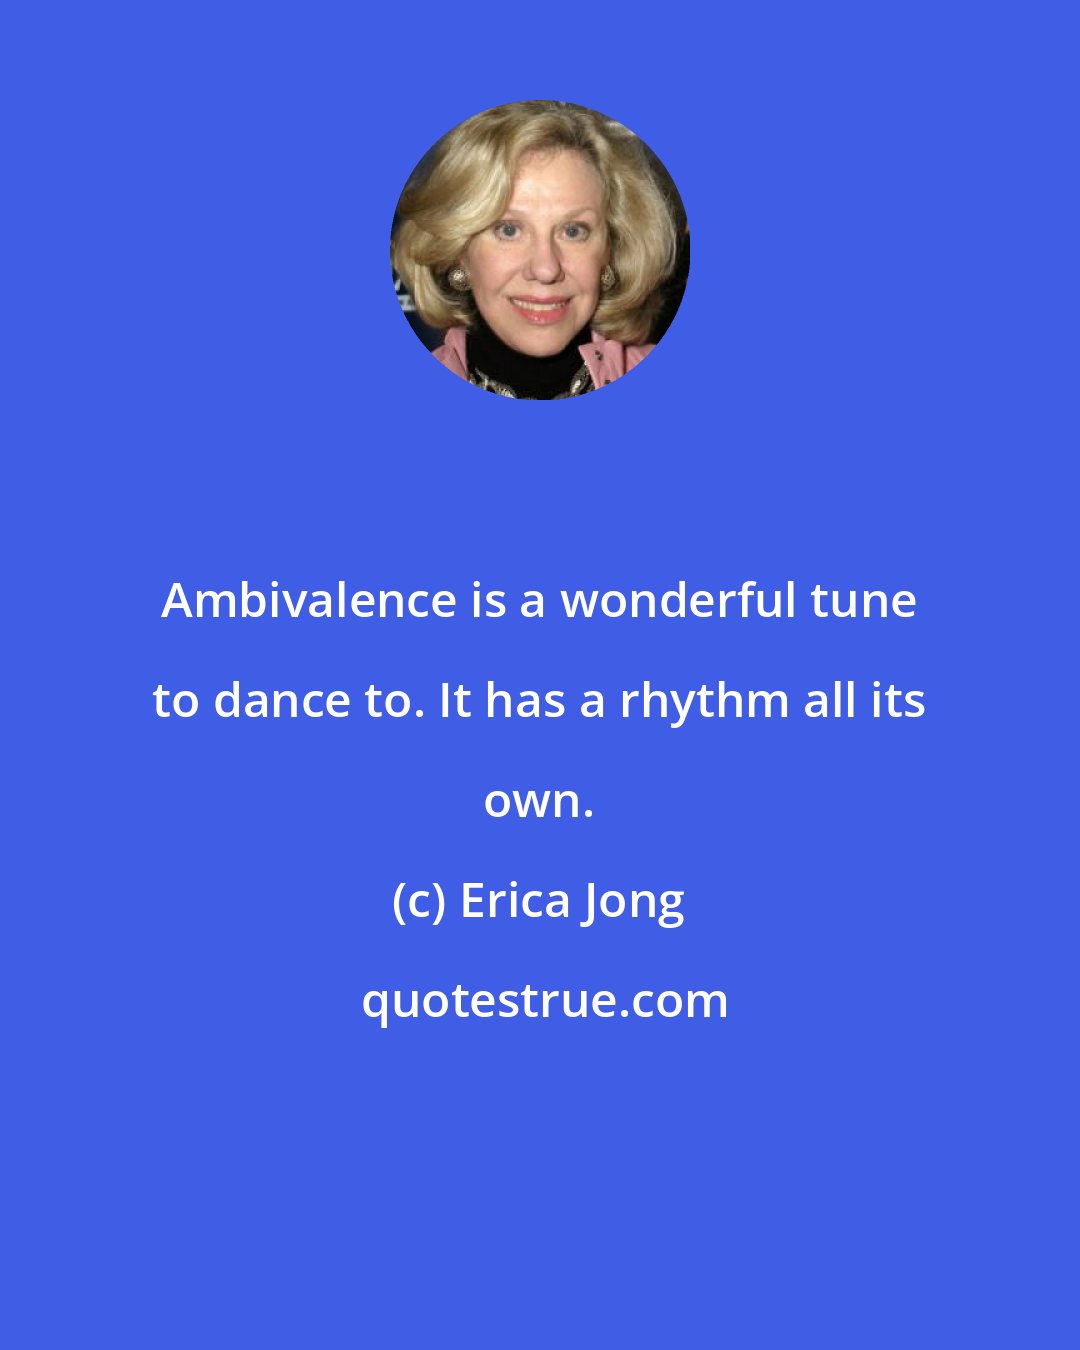 Erica Jong: Ambivalence is a wonderful tune to dance to. It has a rhythm all its own.